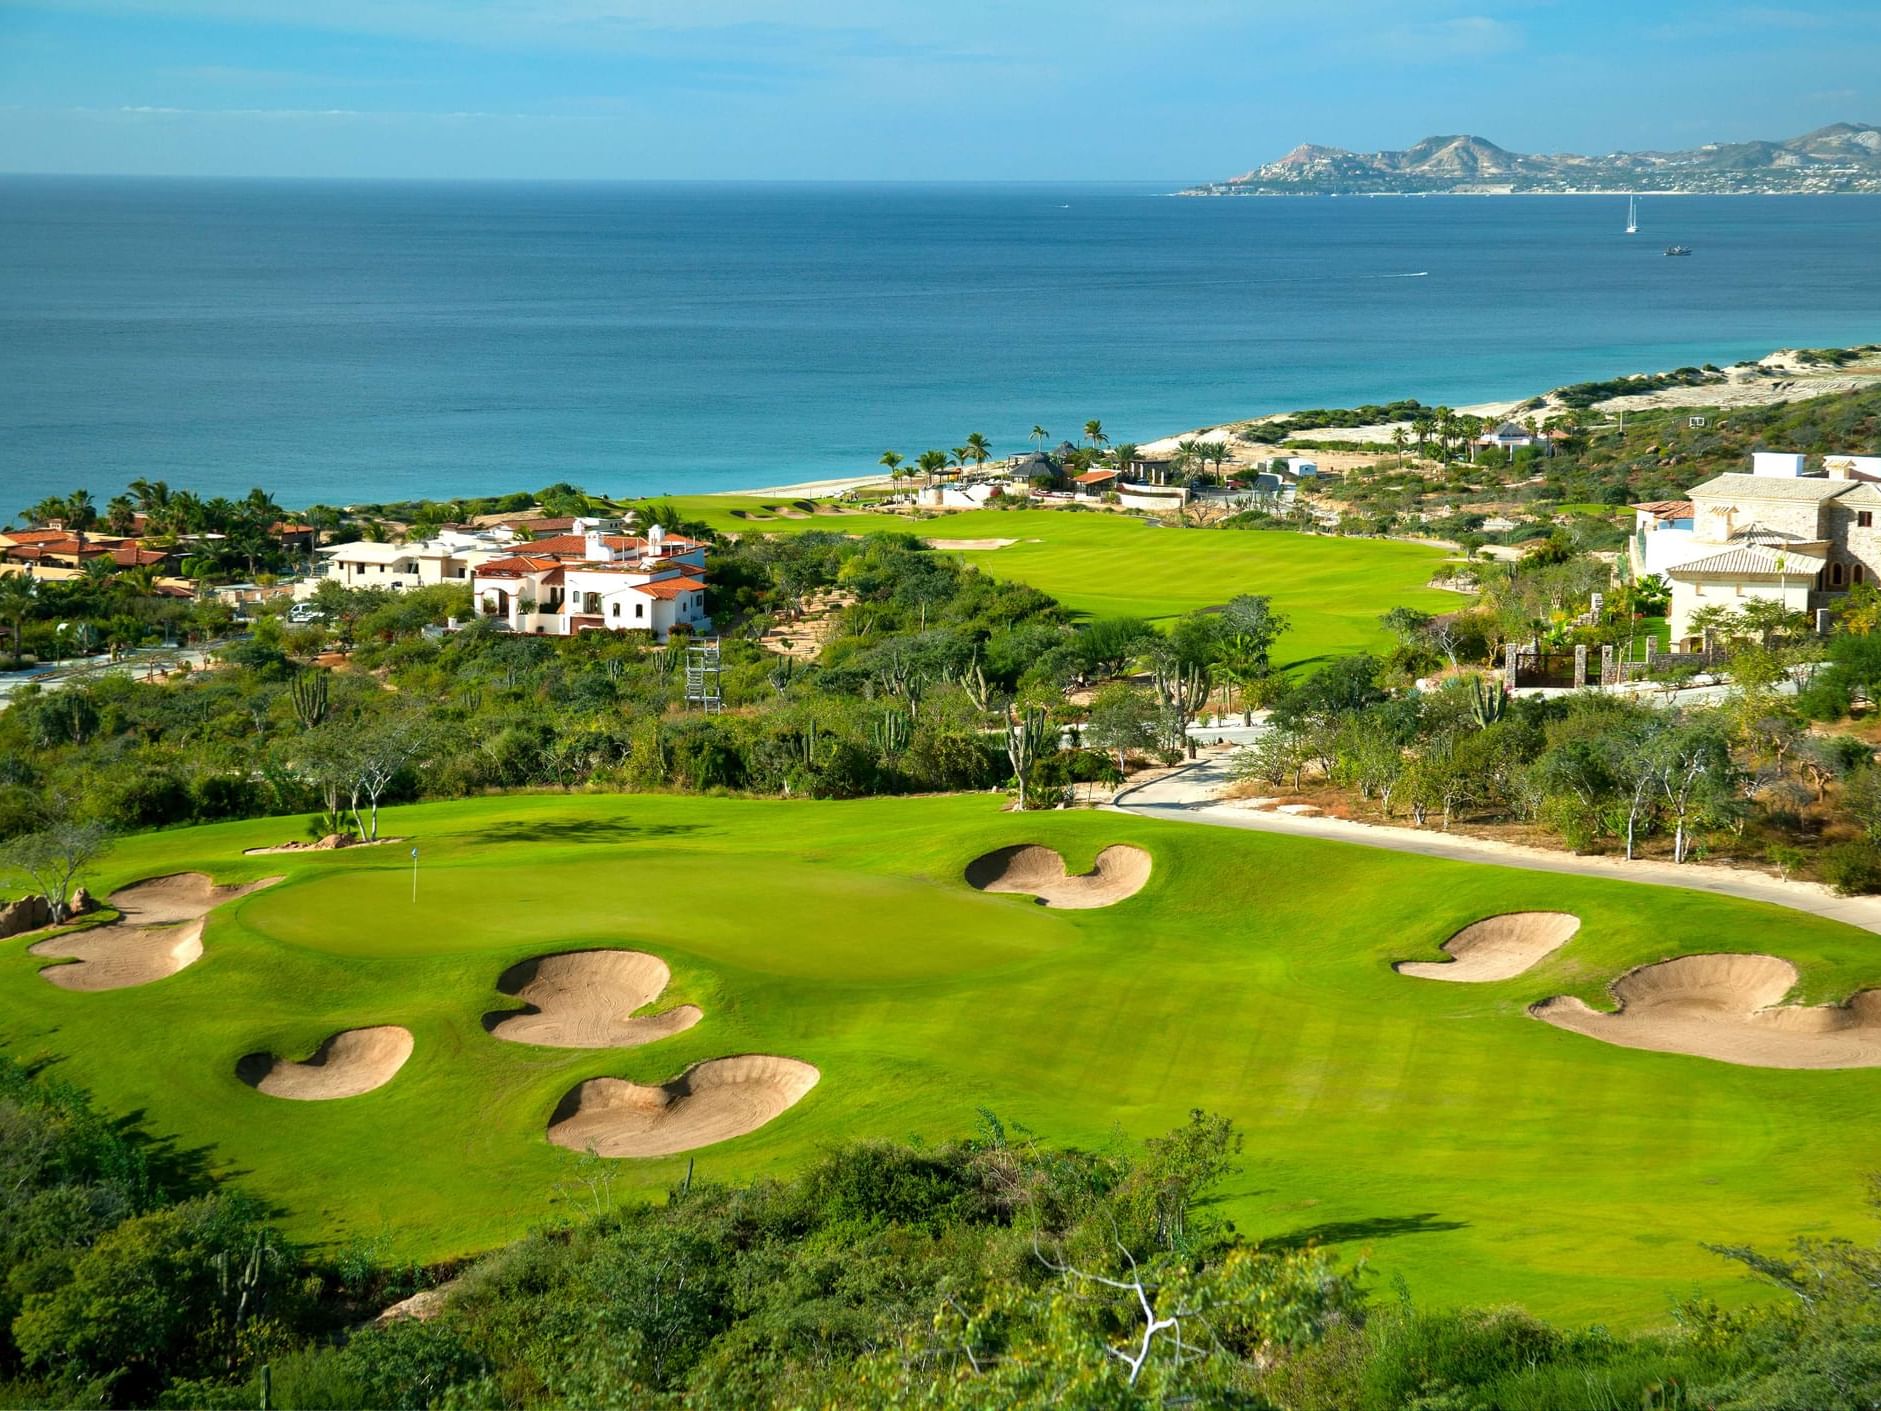 Aerial view of the golf course in Marquis Los Cabos